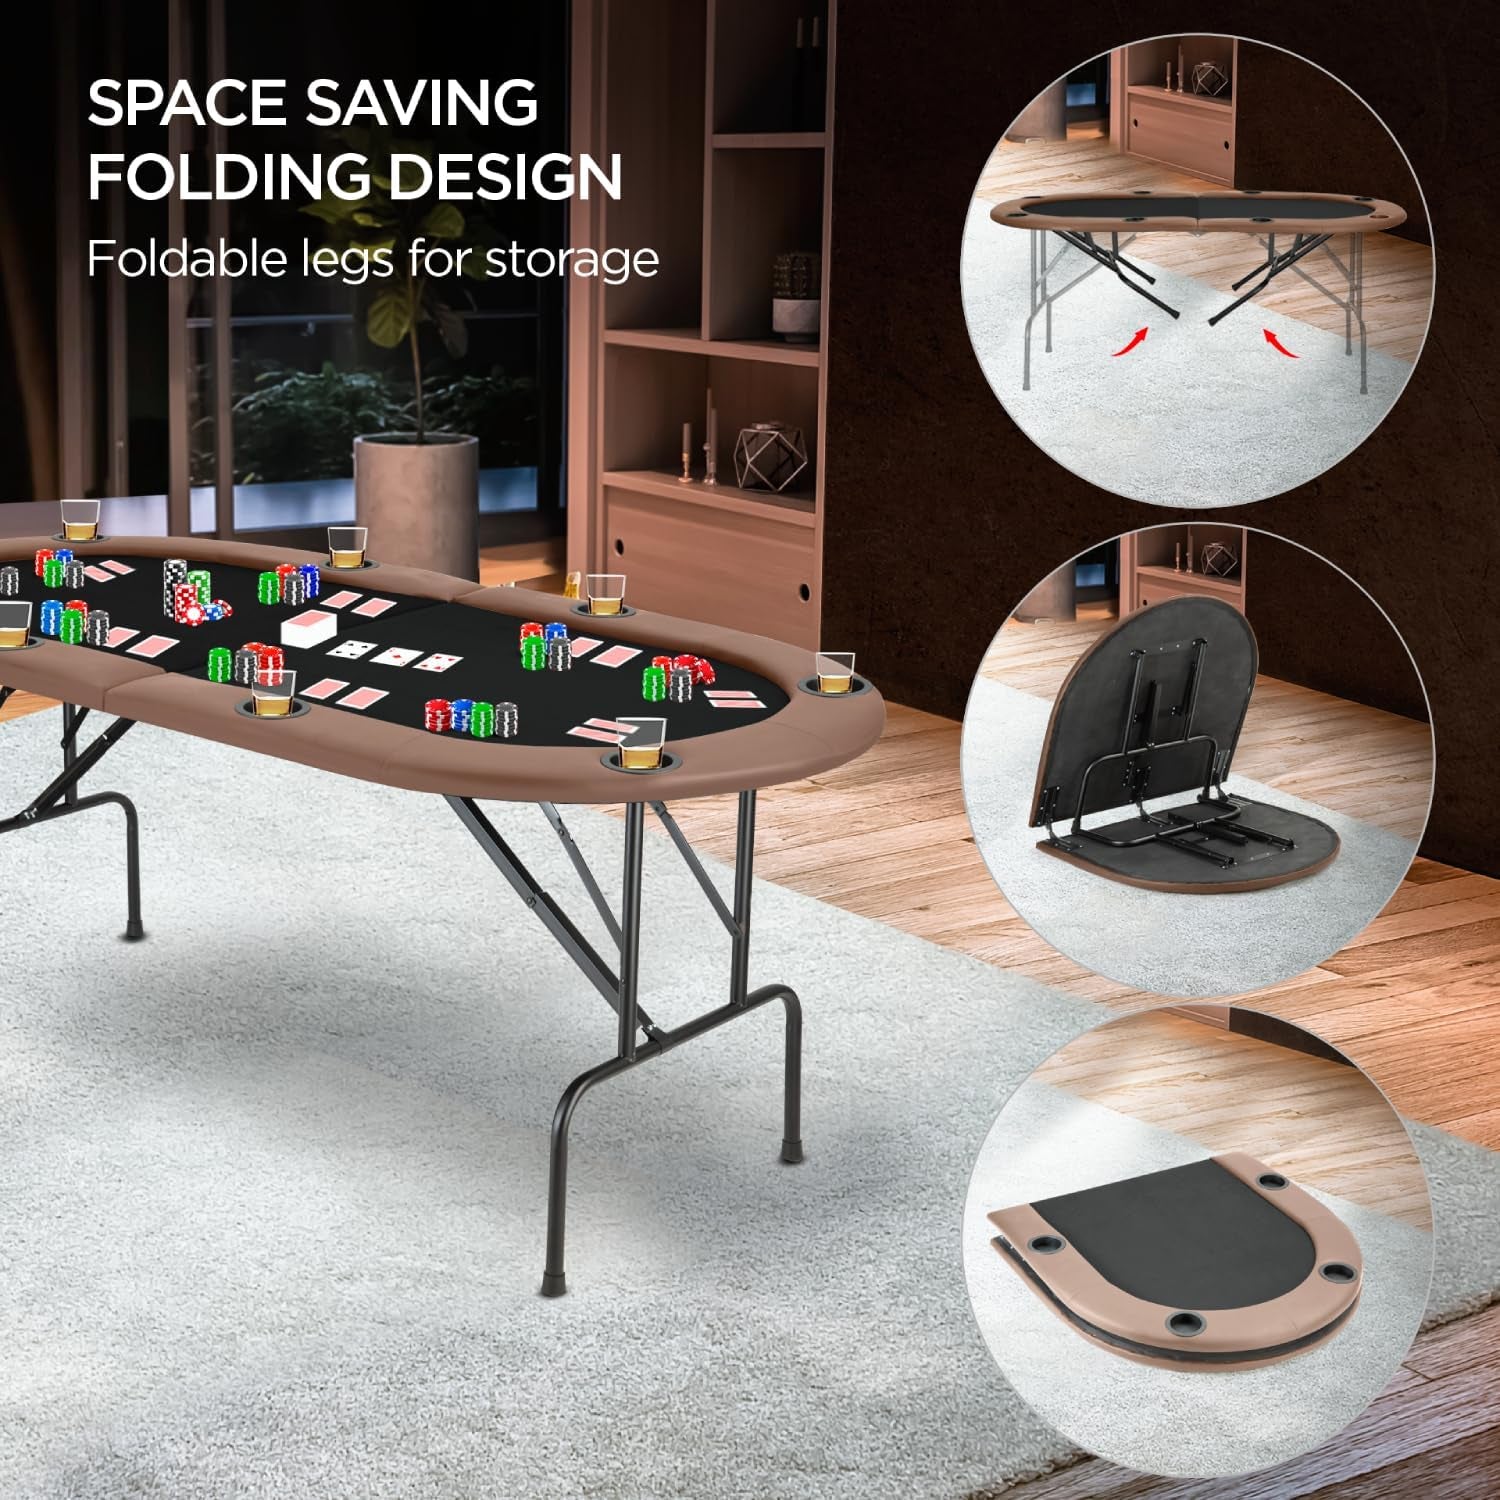 Portable Poker Table Foldable 8 Player Texas Holdem Poker Table with Casino Table Grade Felt Top Cushioned Armrest and 8 Cup Holders for Card Game Gambling Large 72 Inch Oval Folding Poker Table